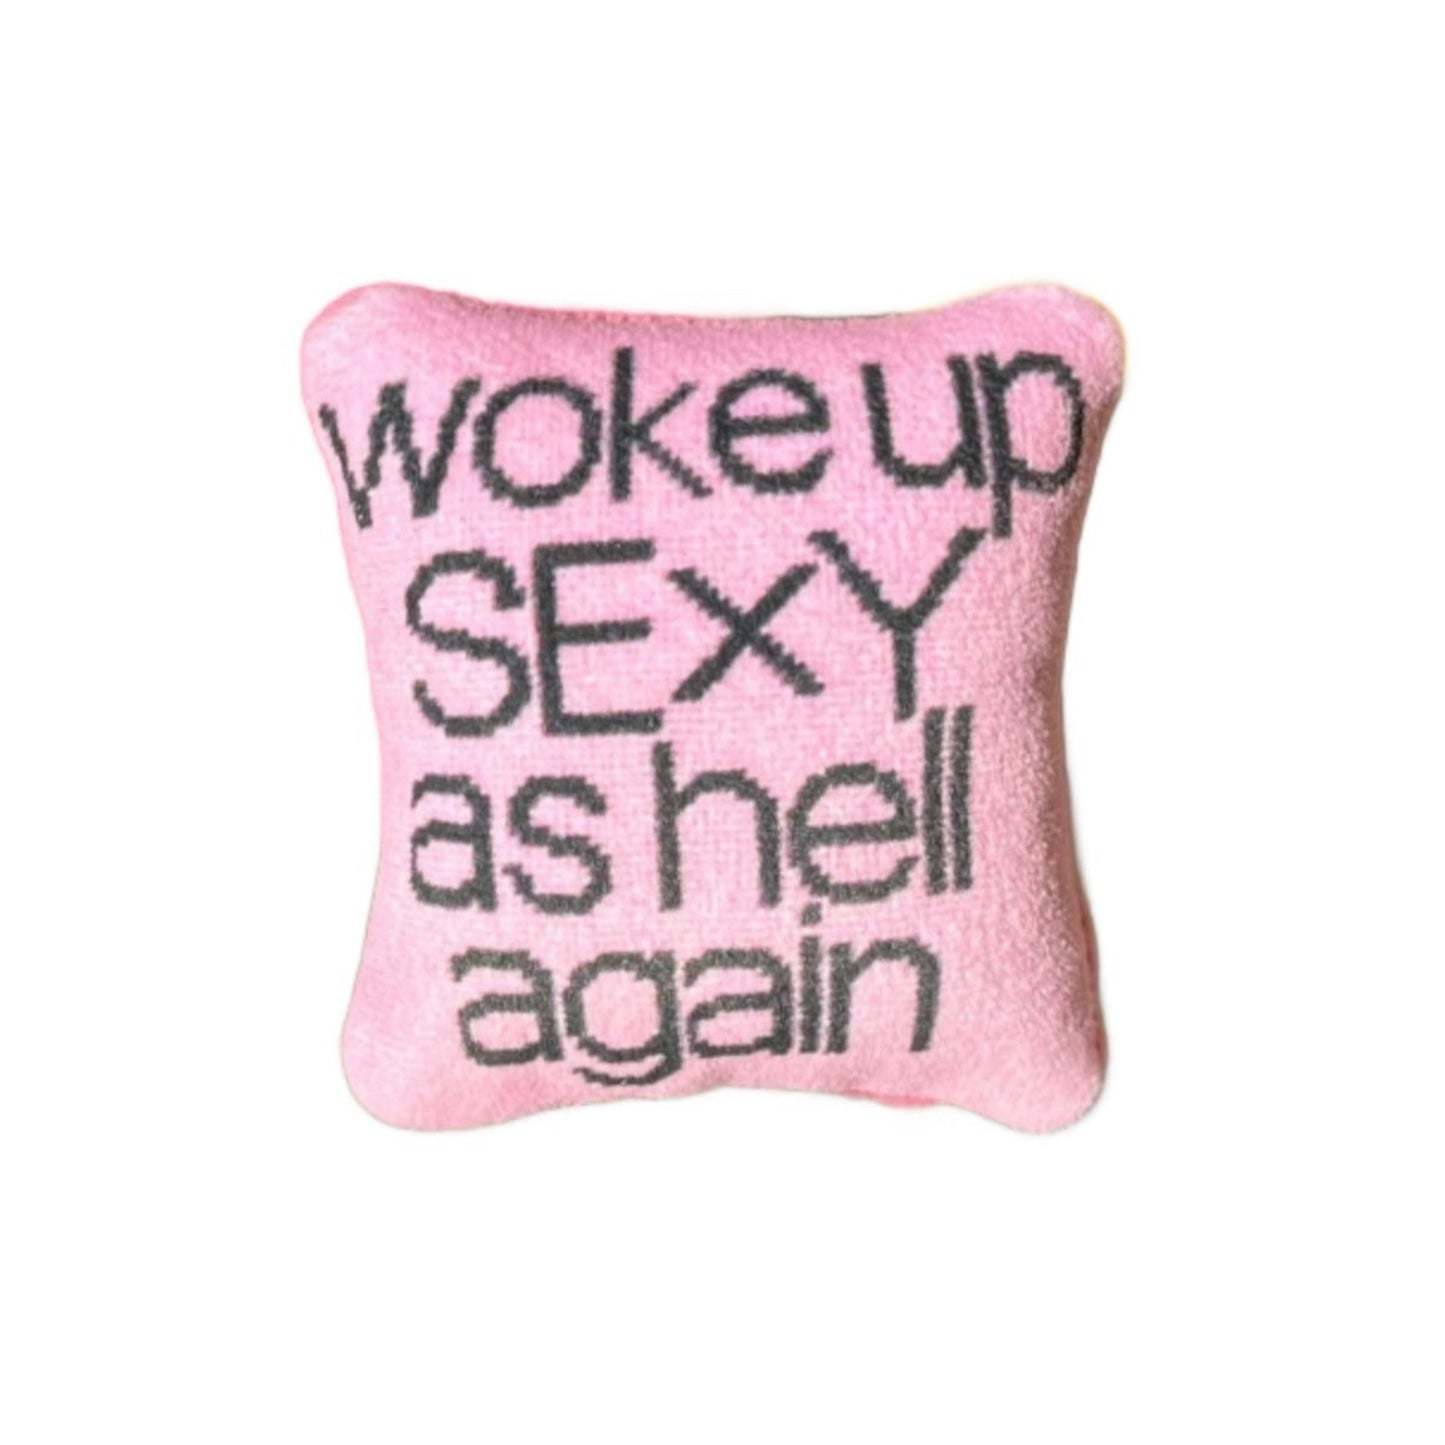 woke up sexy as hell again in black on pink background, mini 3" pillow